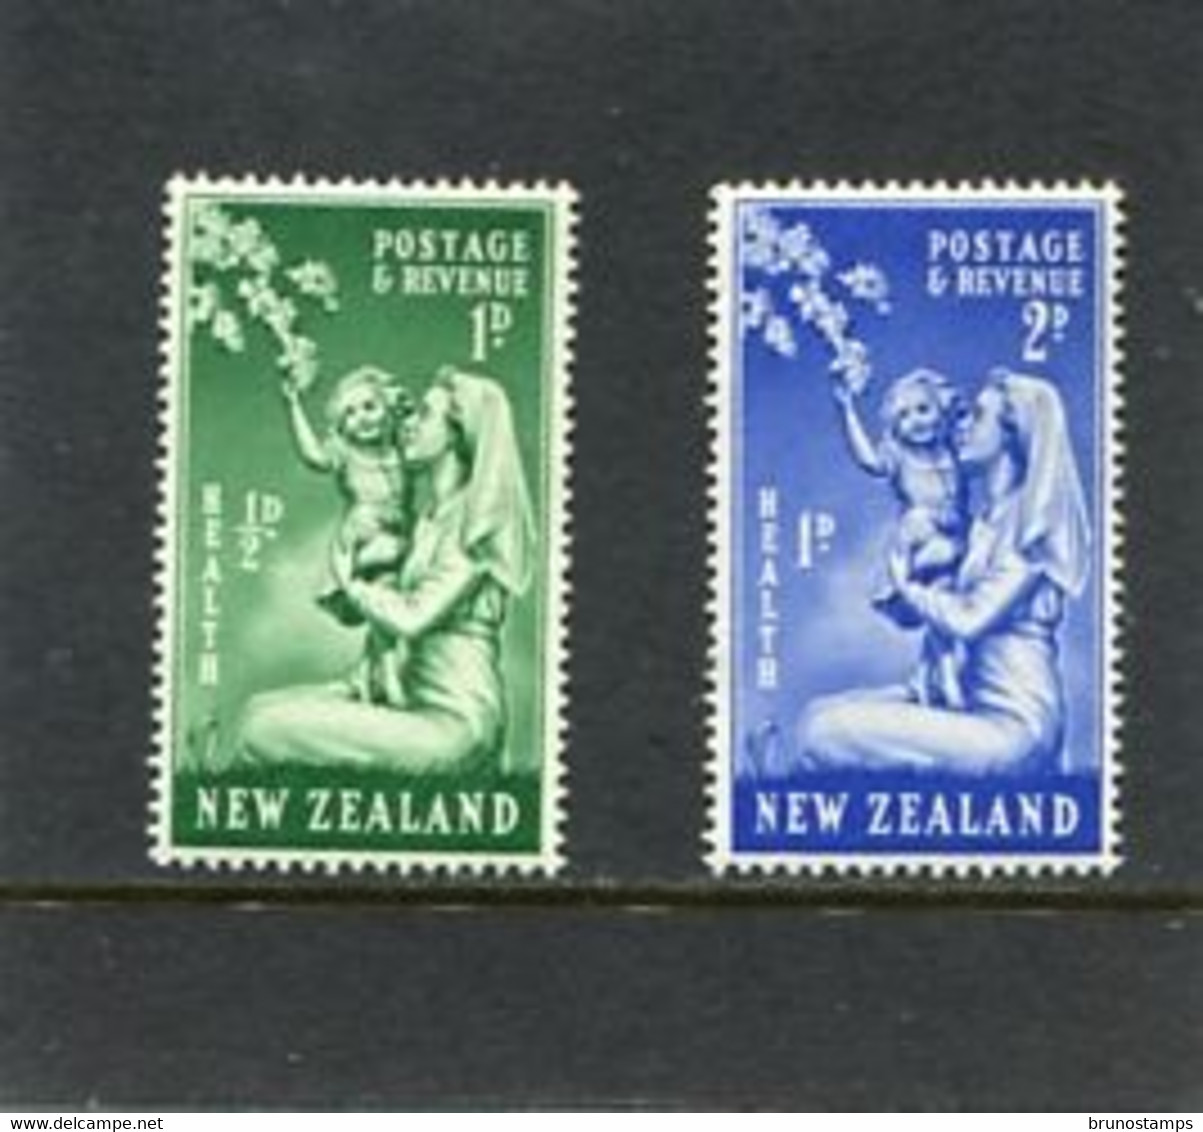 NEW ZEALAND - 1949  HEALTH STAMPS SET  MINT NH - Neufs